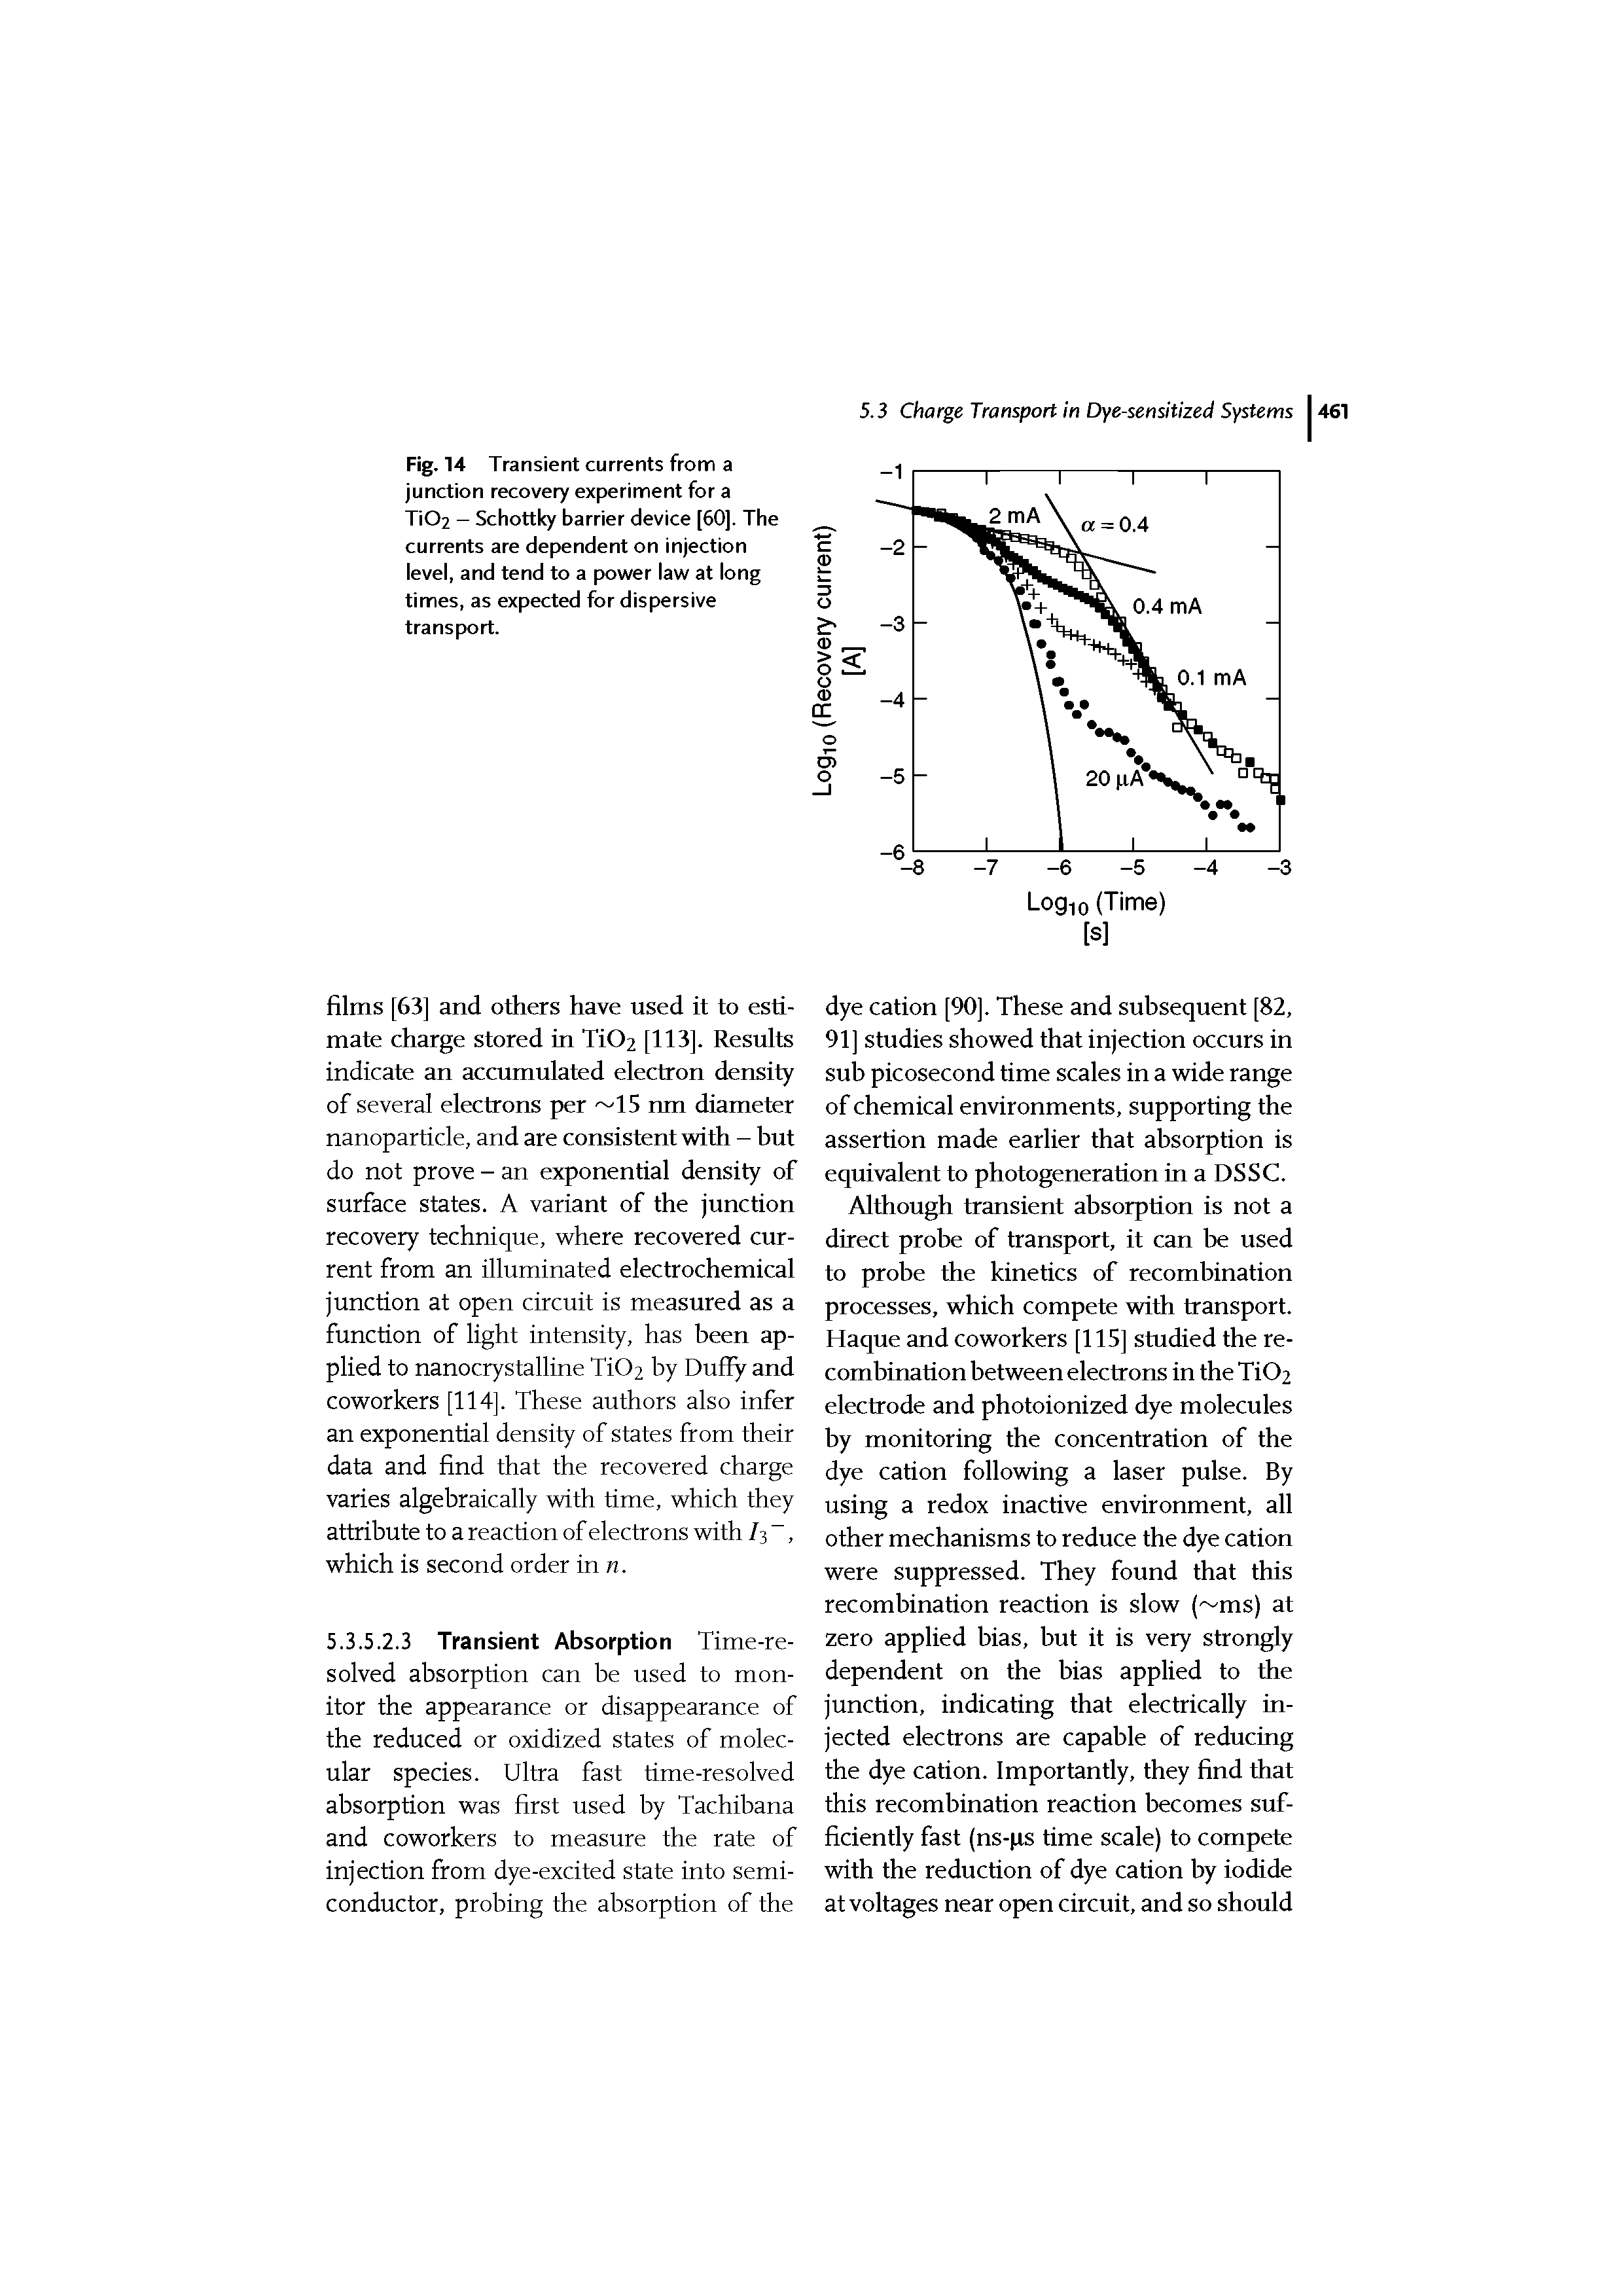 Fig. 14 Transient currents from a junction recovery experiment for a Ti02 - Schottky barrier device [60]. The currents are dependent on injection level, and tend to a power law at long times, as expected for dispersive transport.